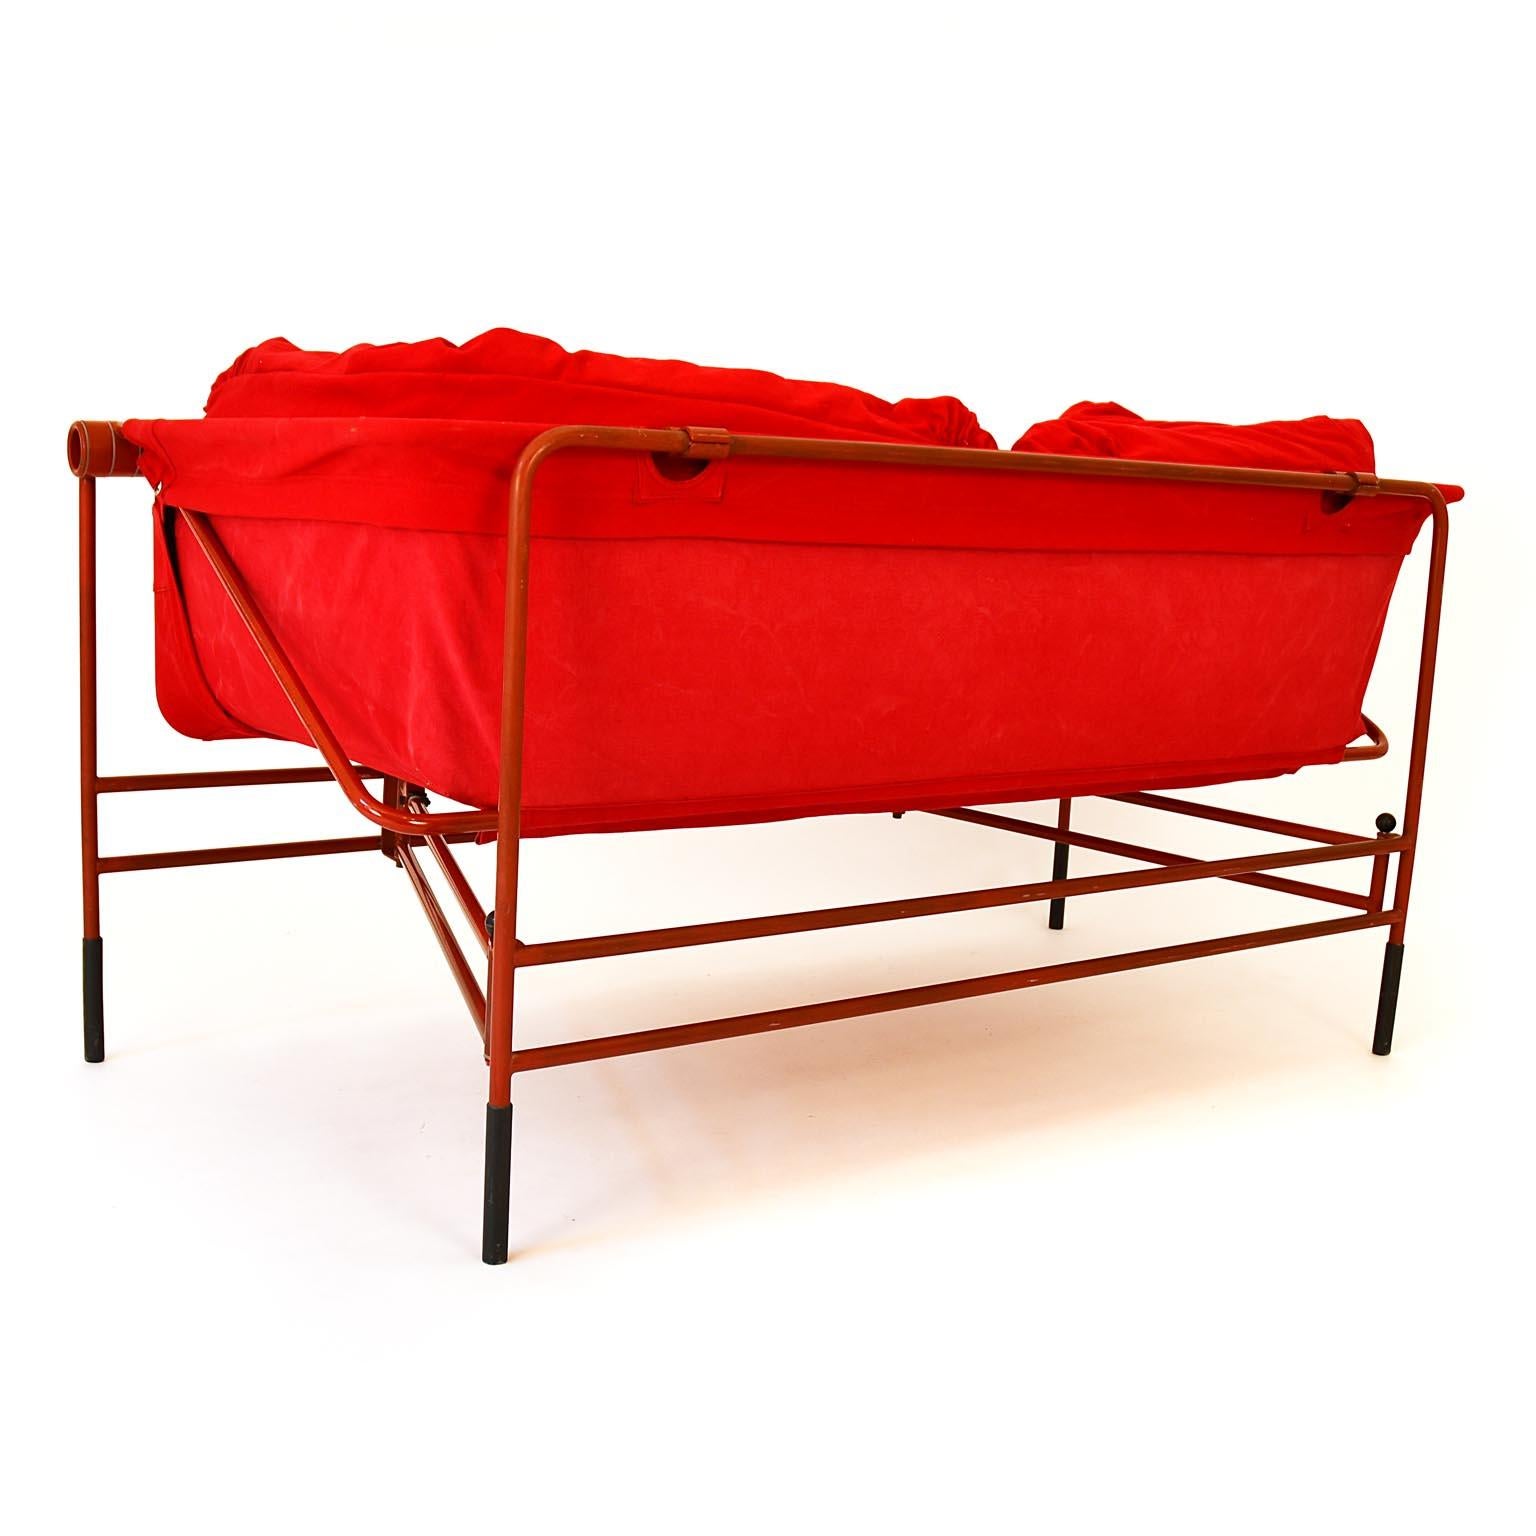 Bench Cabriolet 1980s Red Fabrik Metal Bruno Rota Italy 3